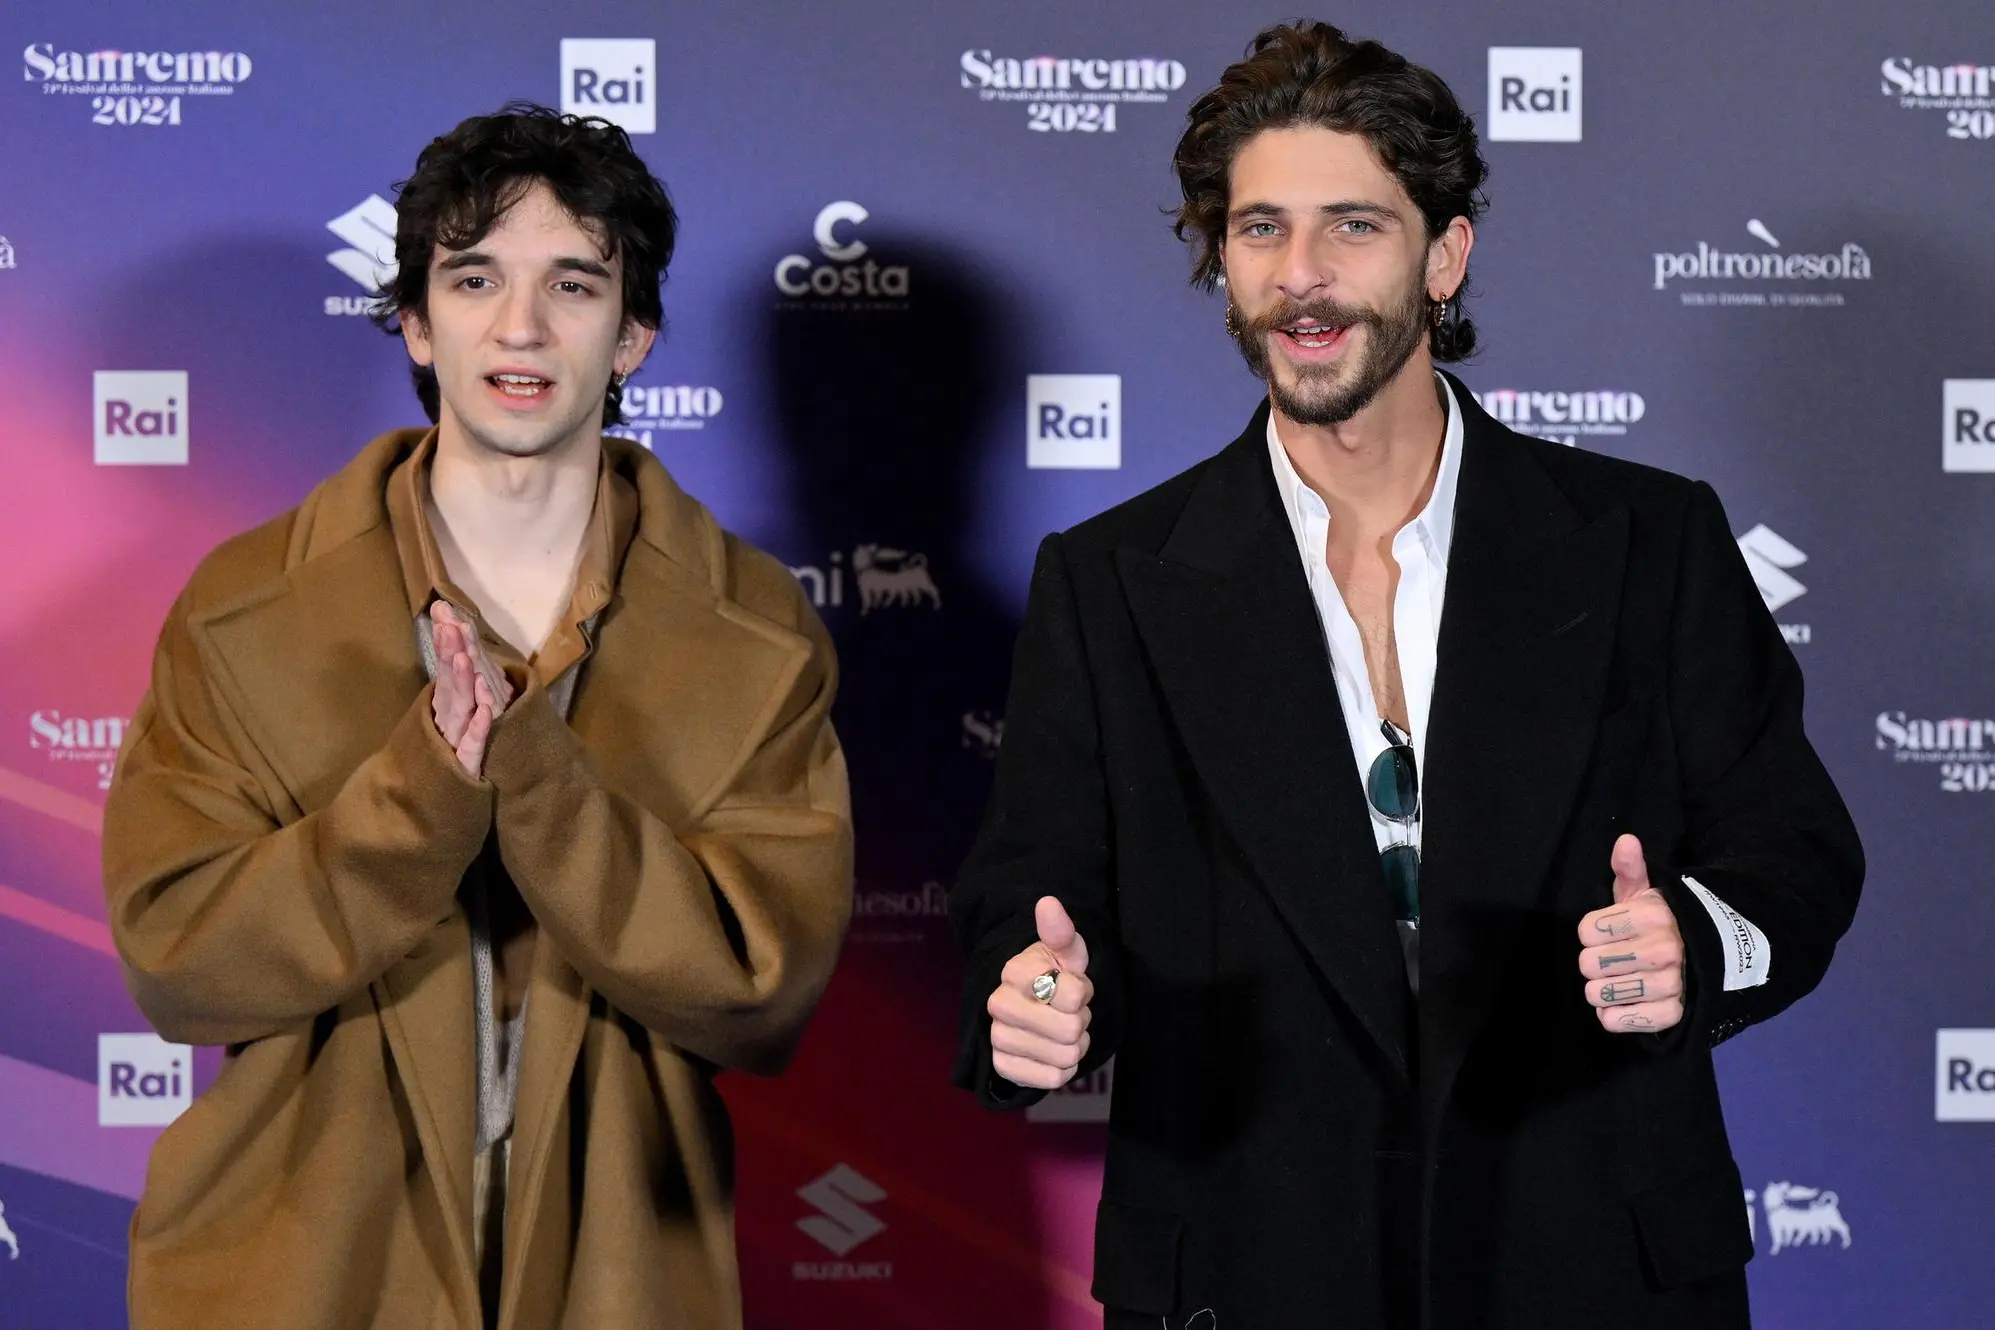 Italian duo Santi Francesi pose during a photocall on the occasion of the 74th Sanremo Italian Song Festival, in Sanremo, Italy, 07 February 2024. The music festival will run from 06 to 10 February 2024. ANSA/ETTORE FERRARI